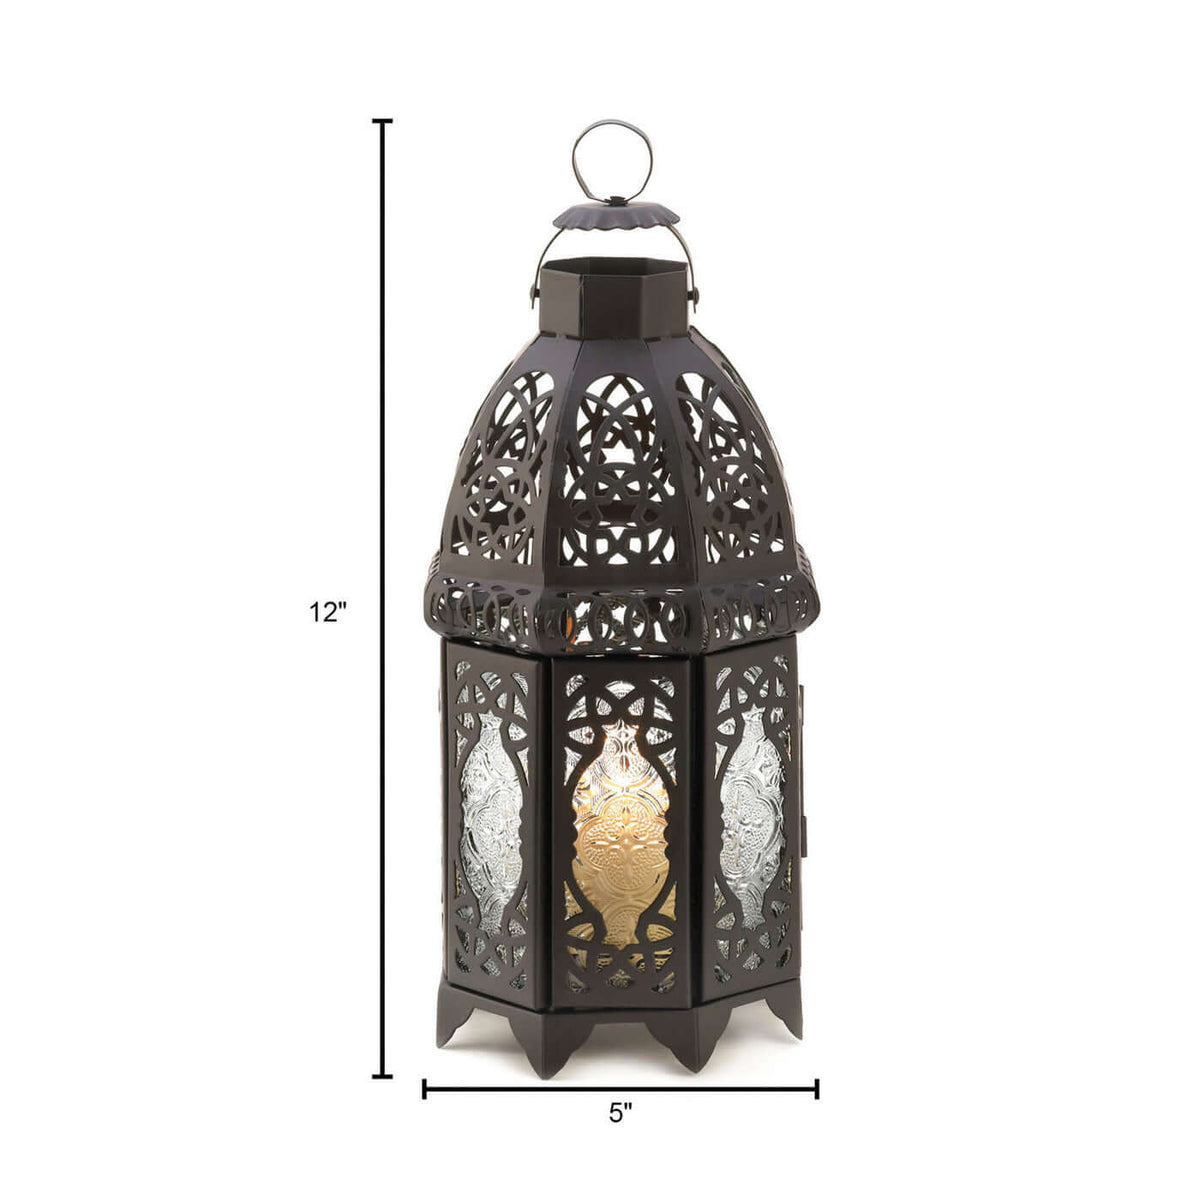 Set of 2 Black Lace Candle Lanterns - The House of Awareness